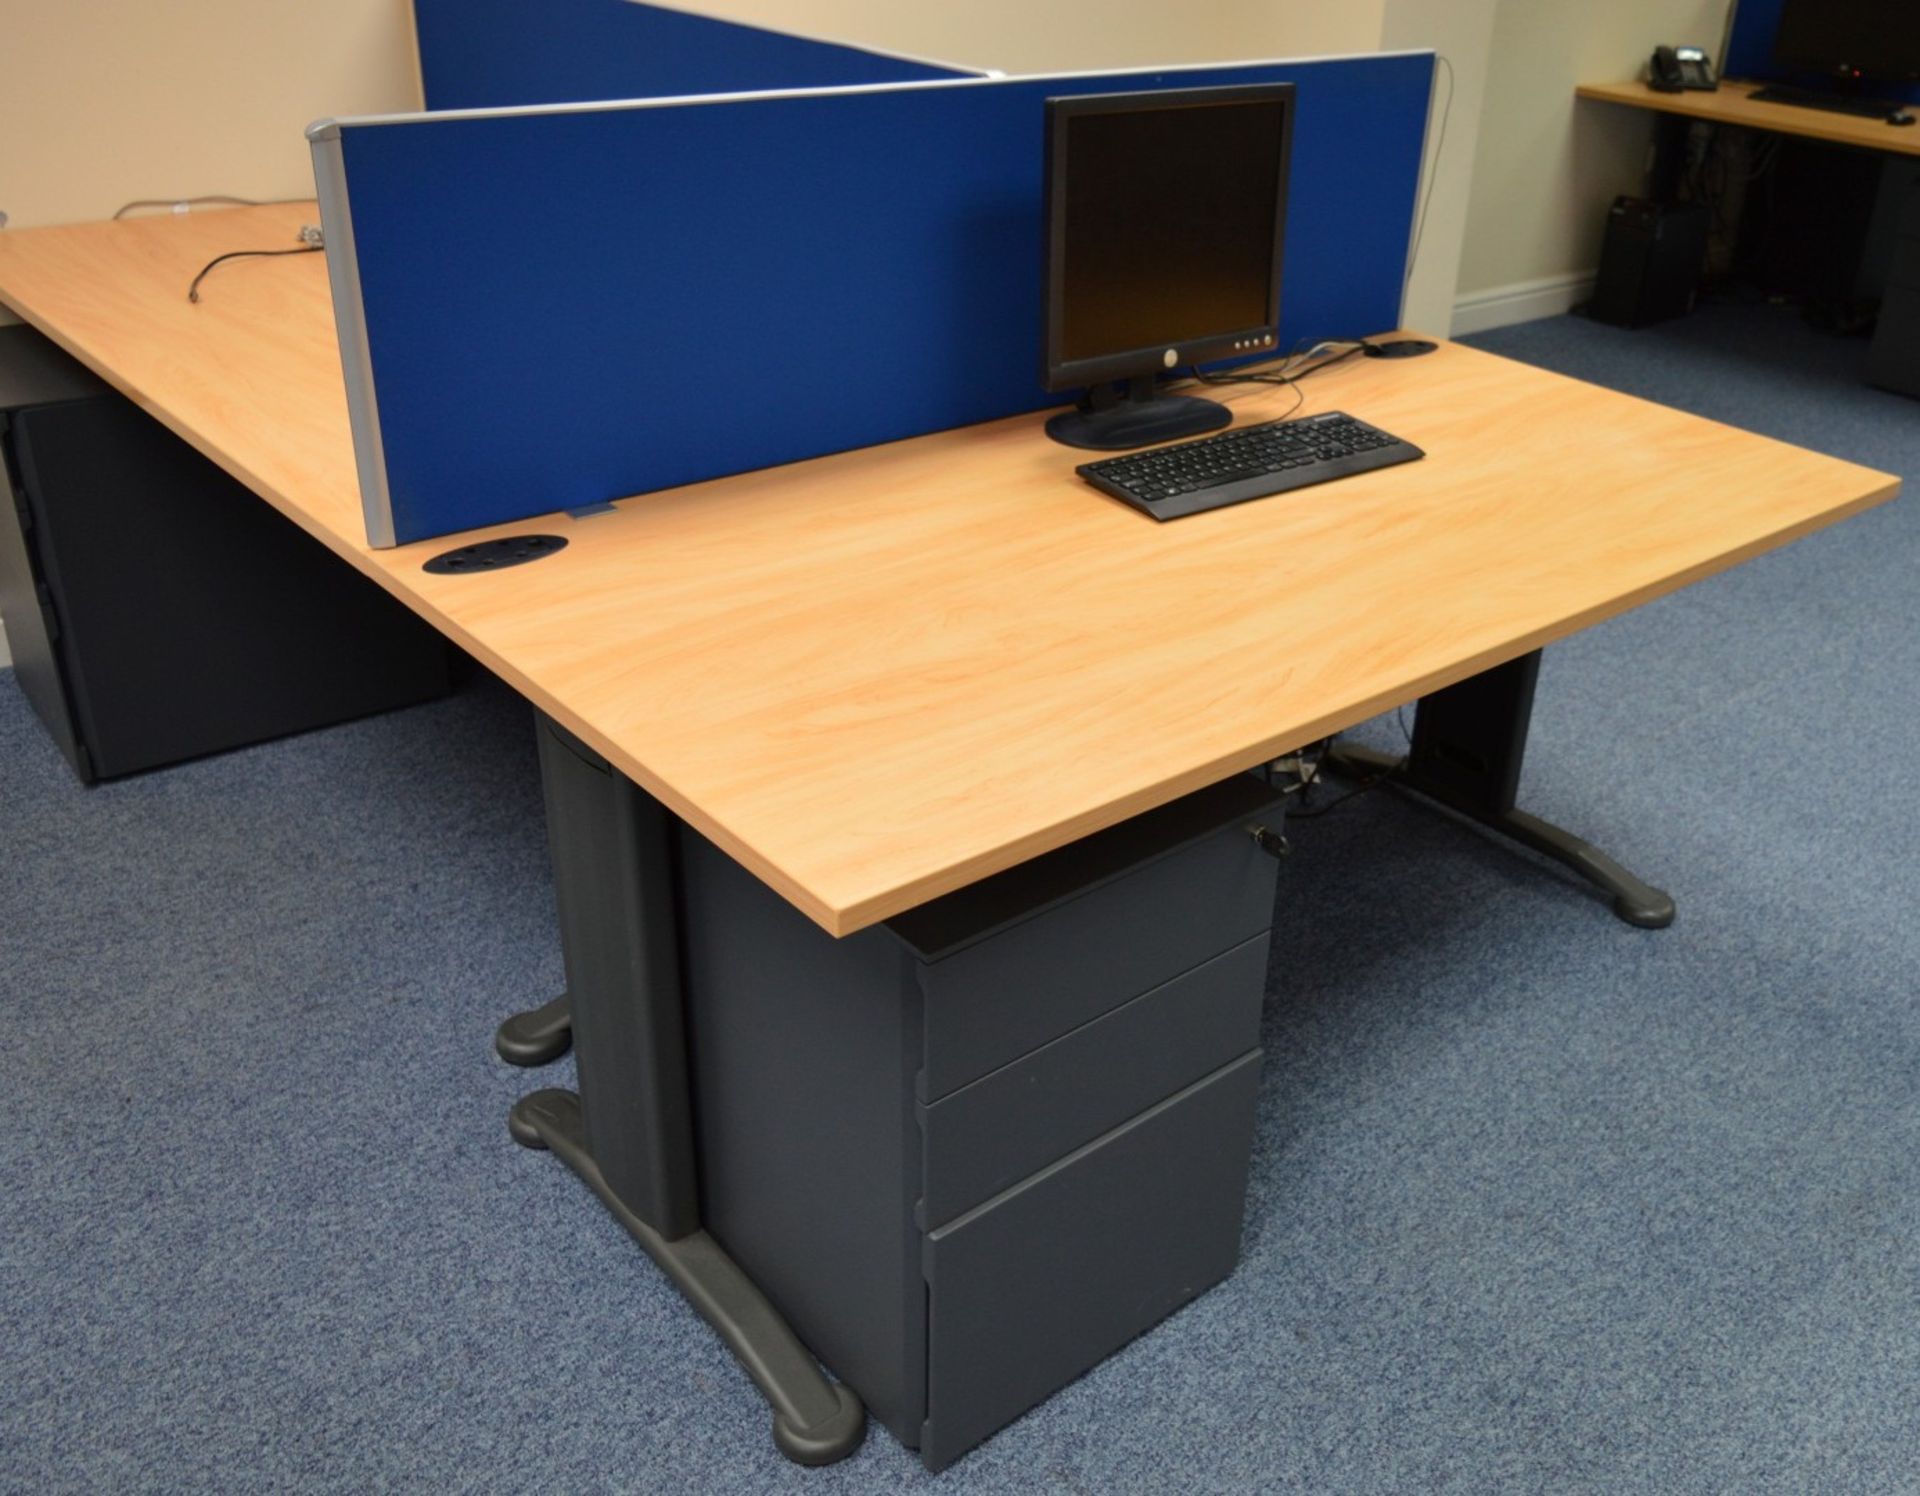 1 x Tripod Office Workstation Desk With Chairs - Suitable For 3 Users - Includes Three Premium - Image 5 of 11